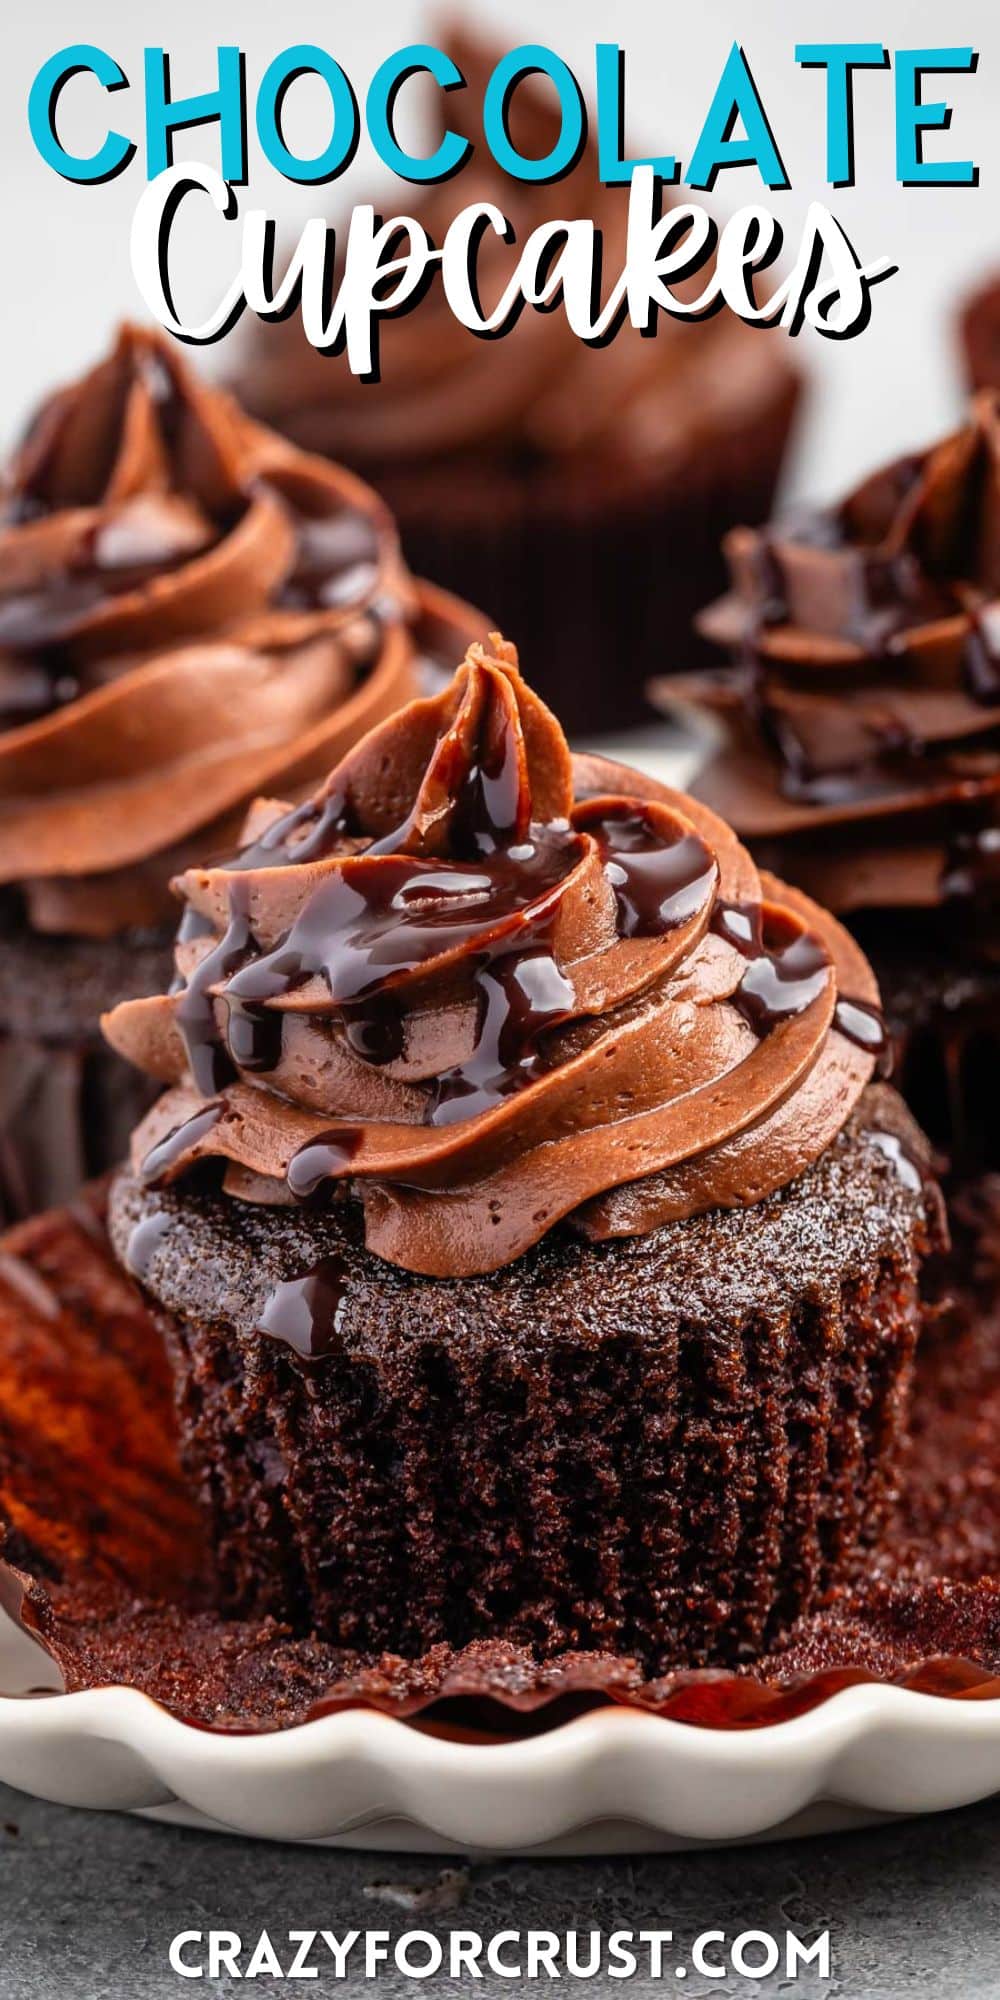 unwrapped cupcake with chocolate frosting and chocolate sauce drizzled over top with words on the image.